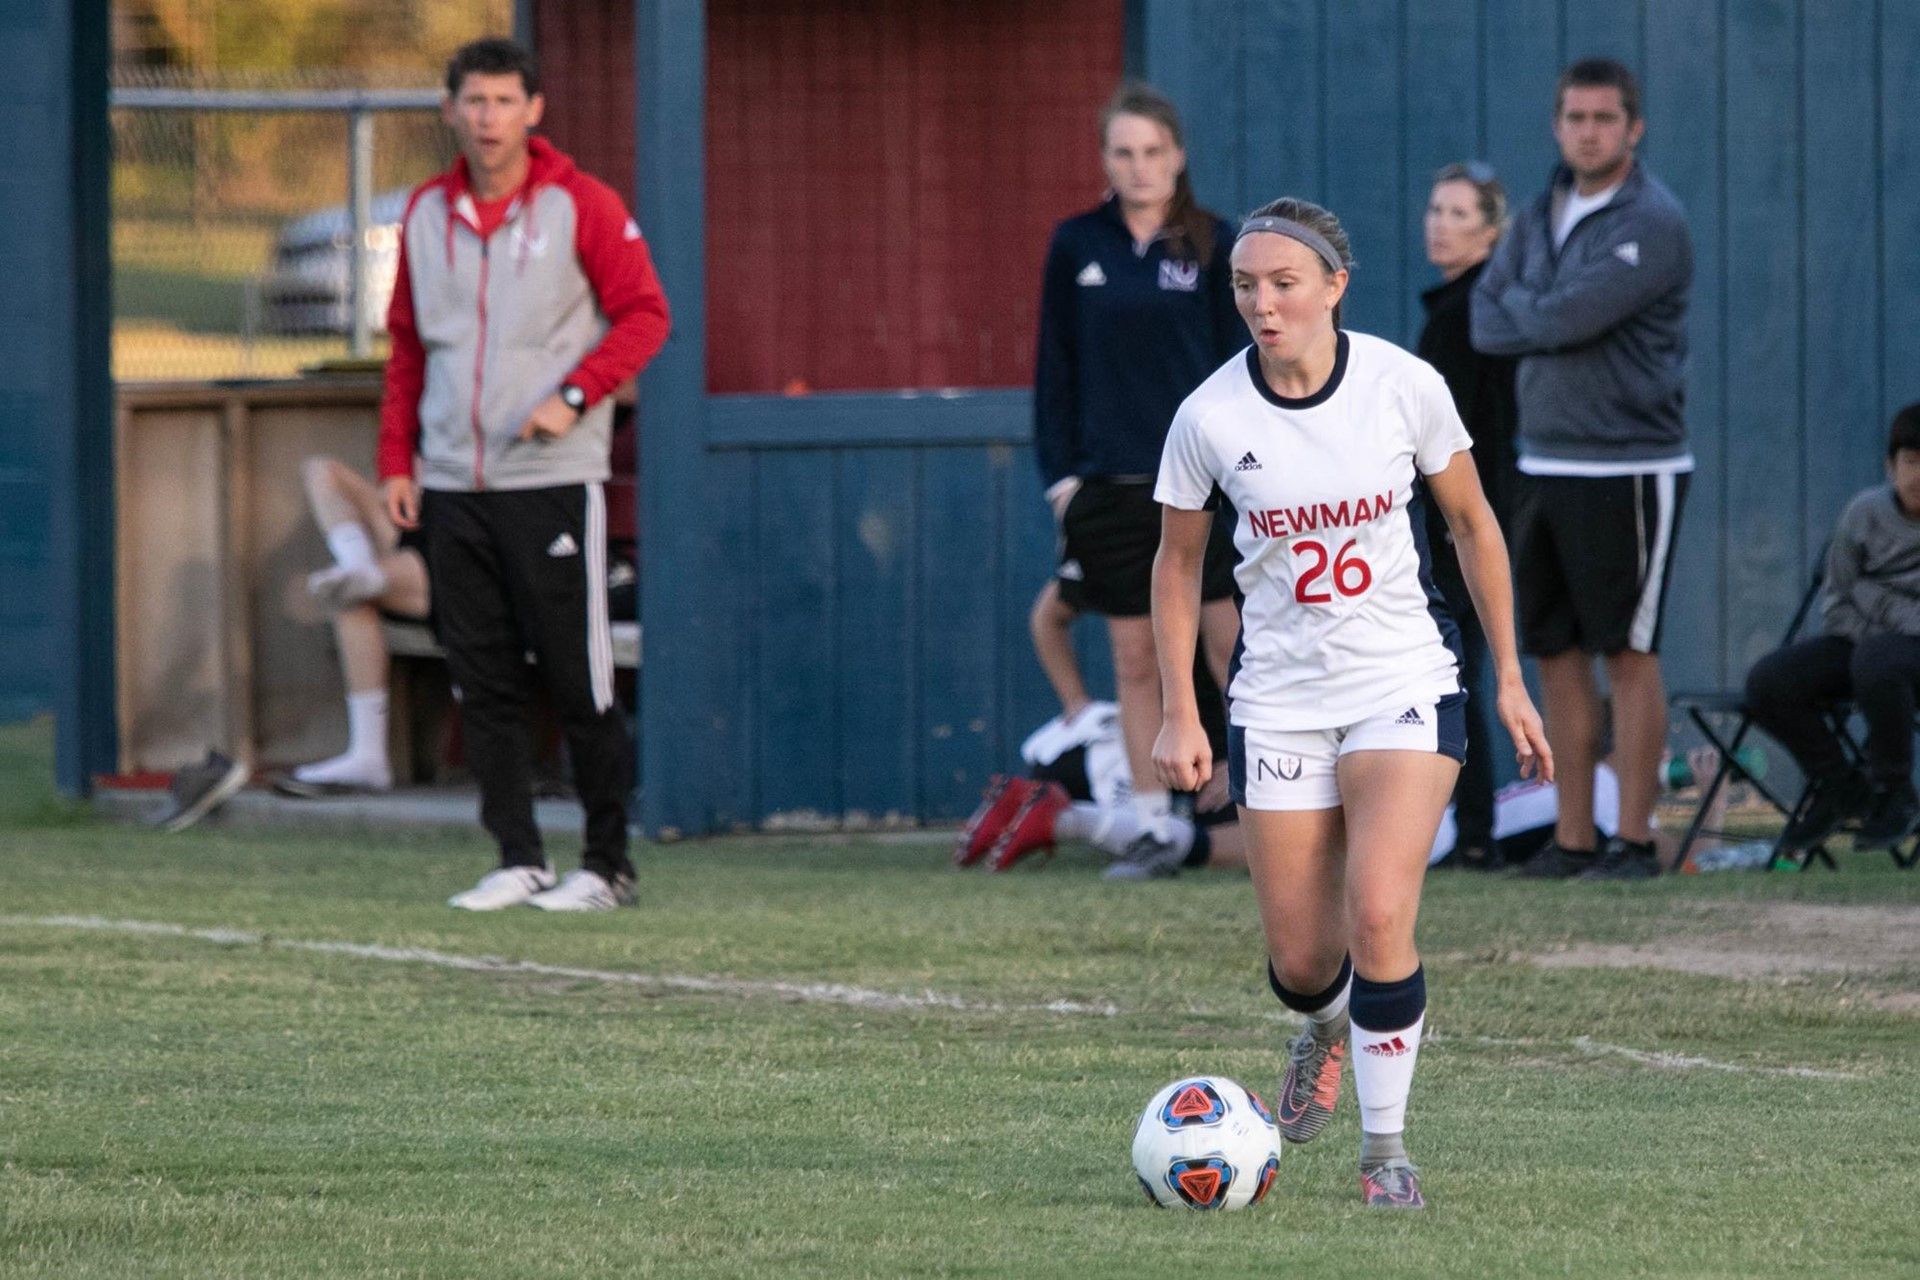 Women's soccer team hopes to compete in MIAA tournament